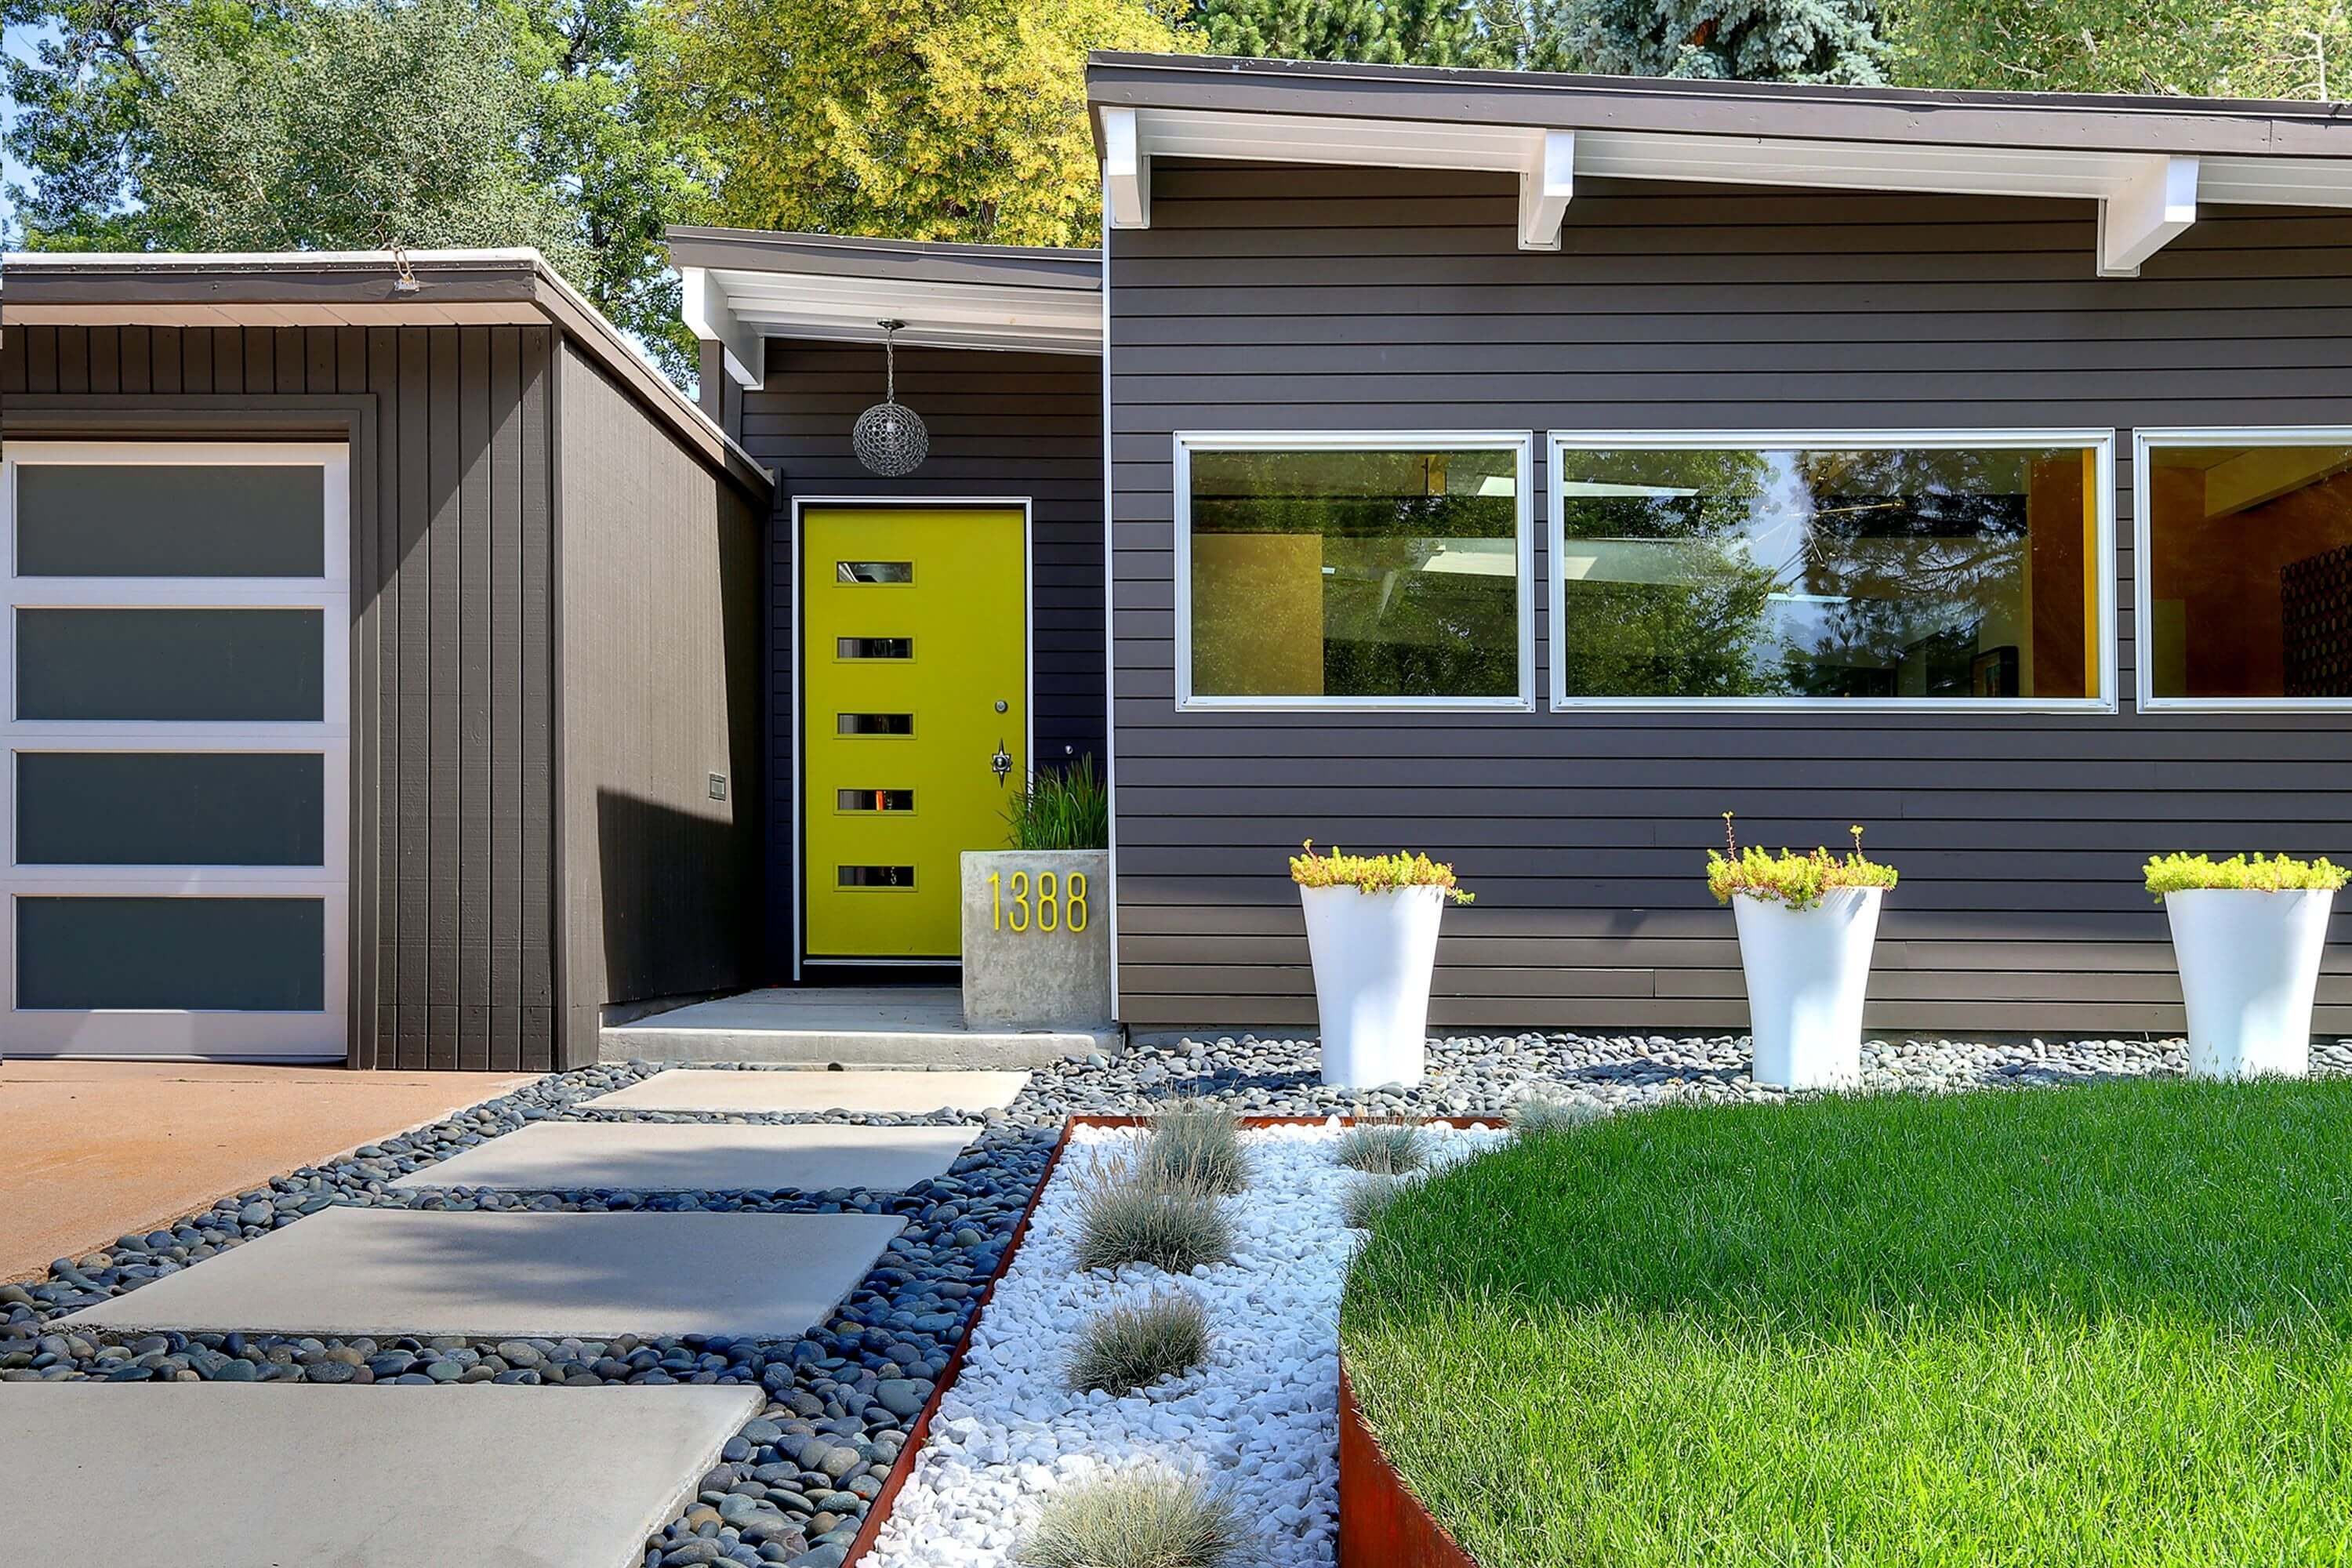 Small Spaces Big Impact: Mid Century Design For Compact Homes